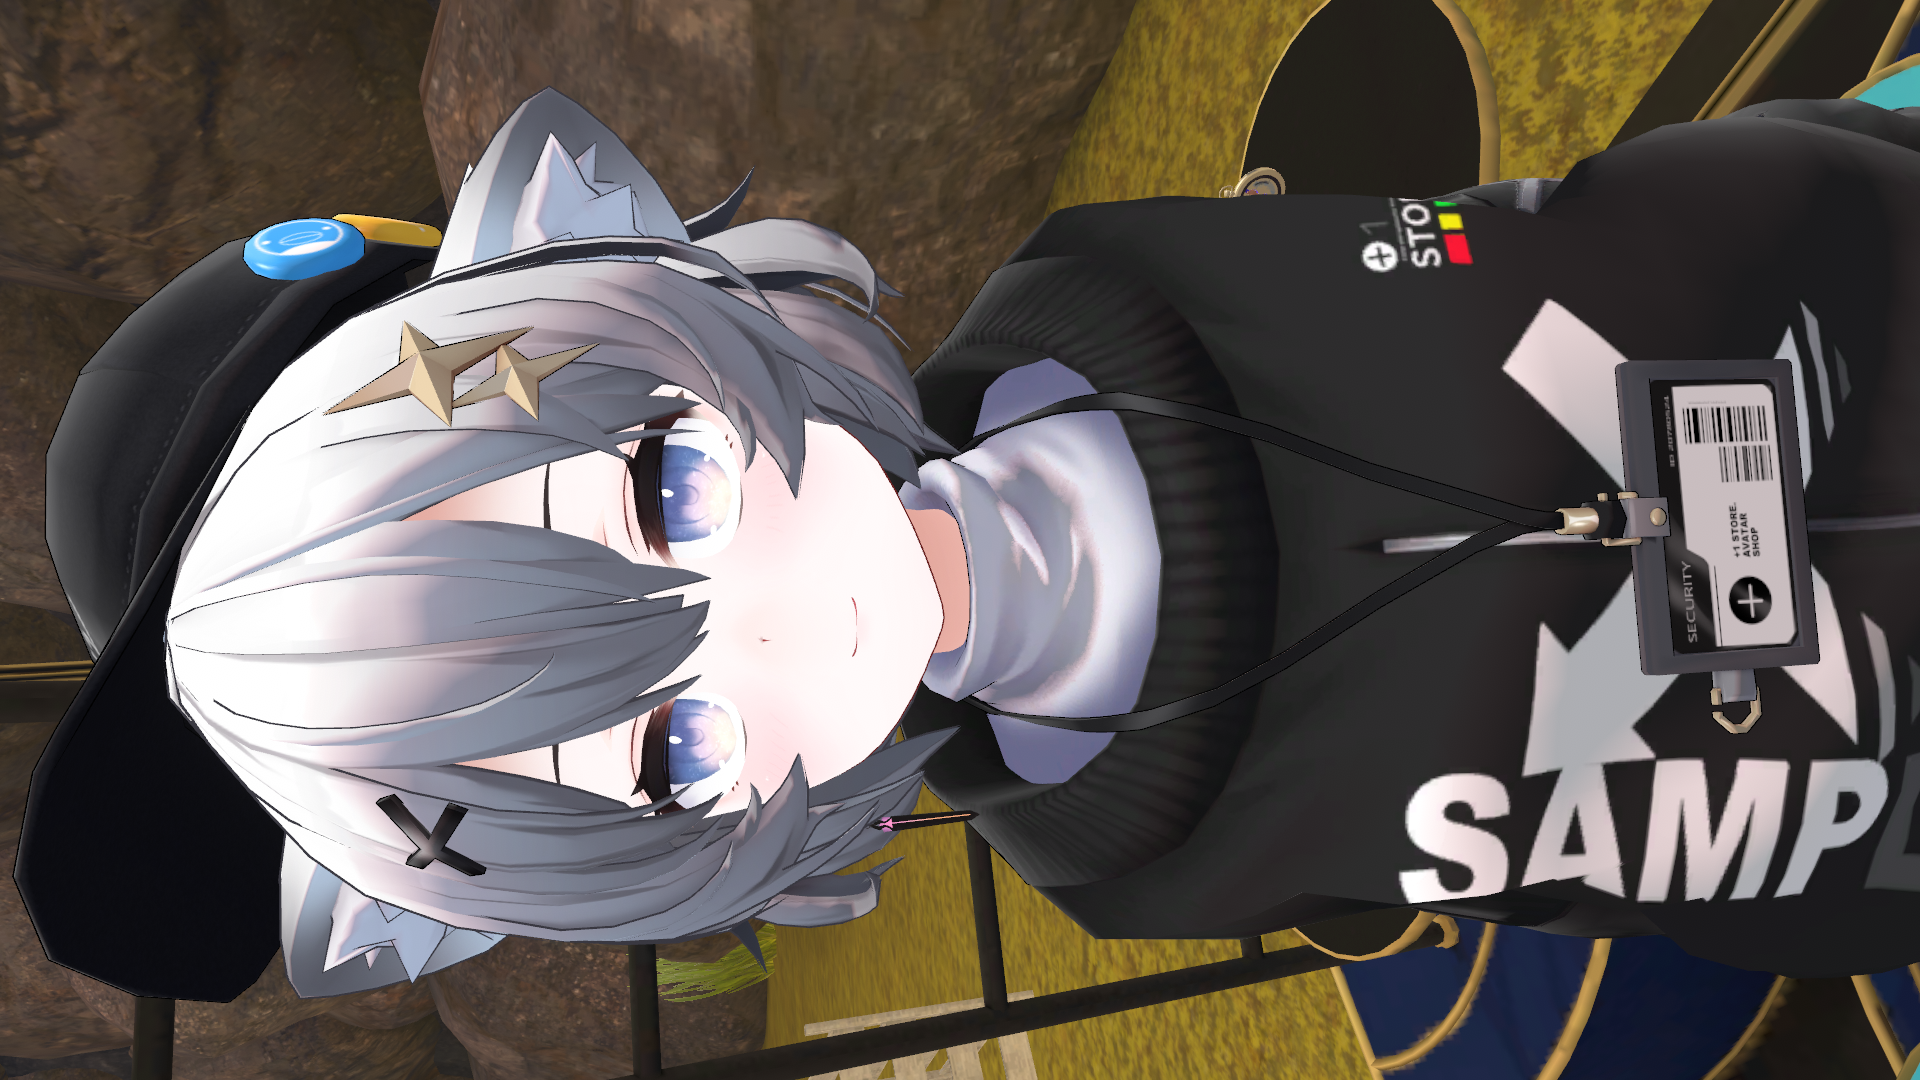 VRChat_1920x1080_2021-12-05_02-43-22.516.png